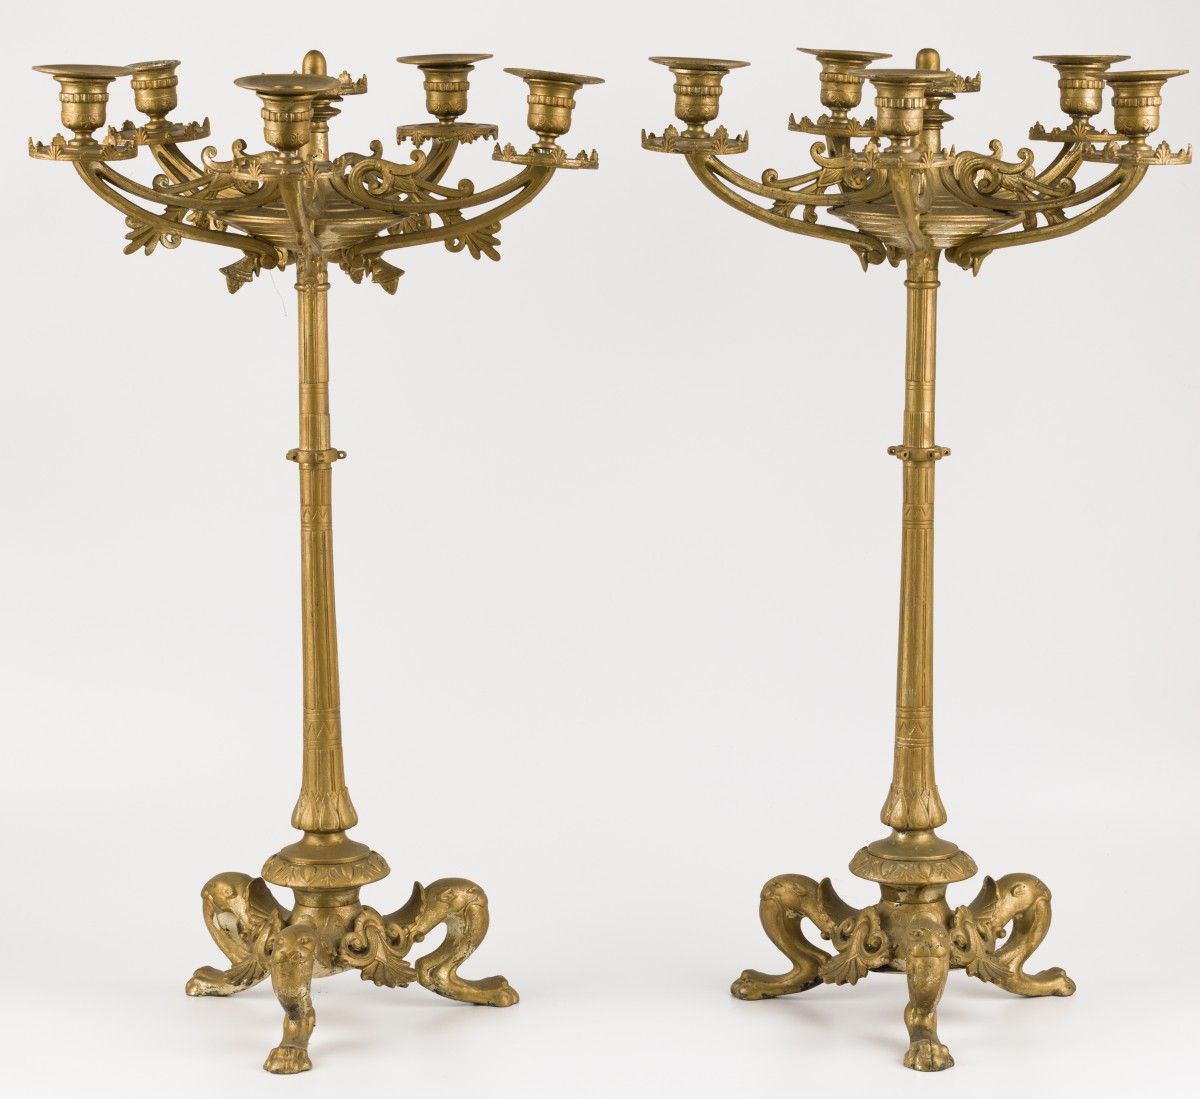 A set of (2) gold painted ZAMAC candelabra, France, ca. 1900. Cinco luces, remat&hellip;